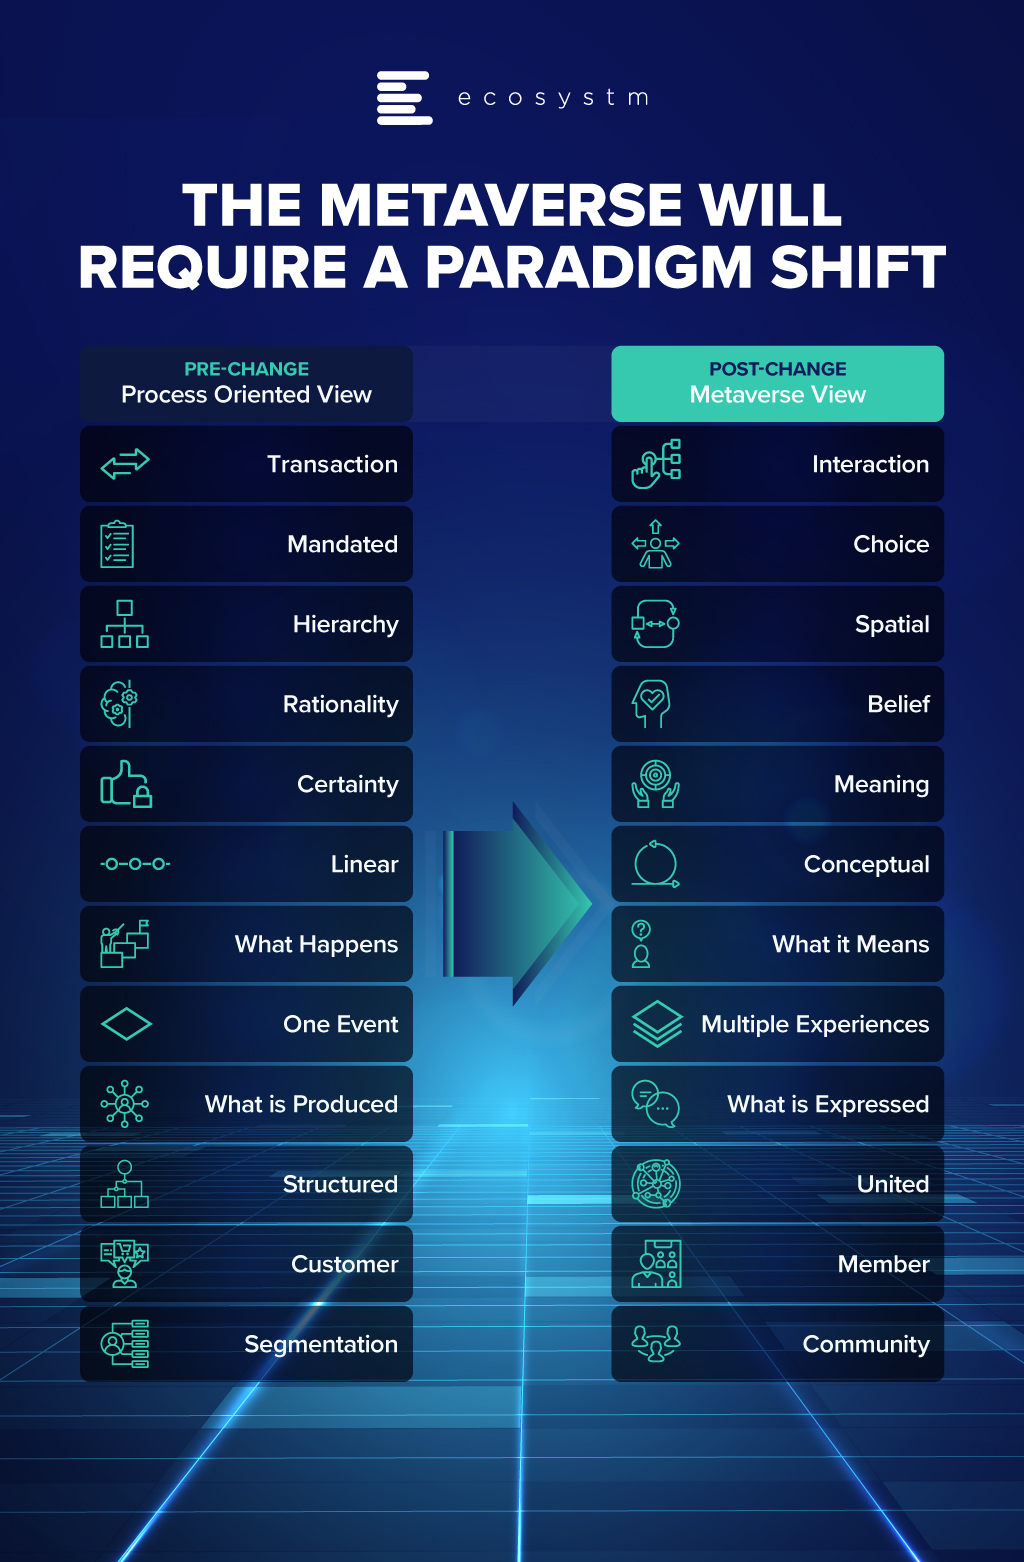 The Metaverse will require a paradigm shift